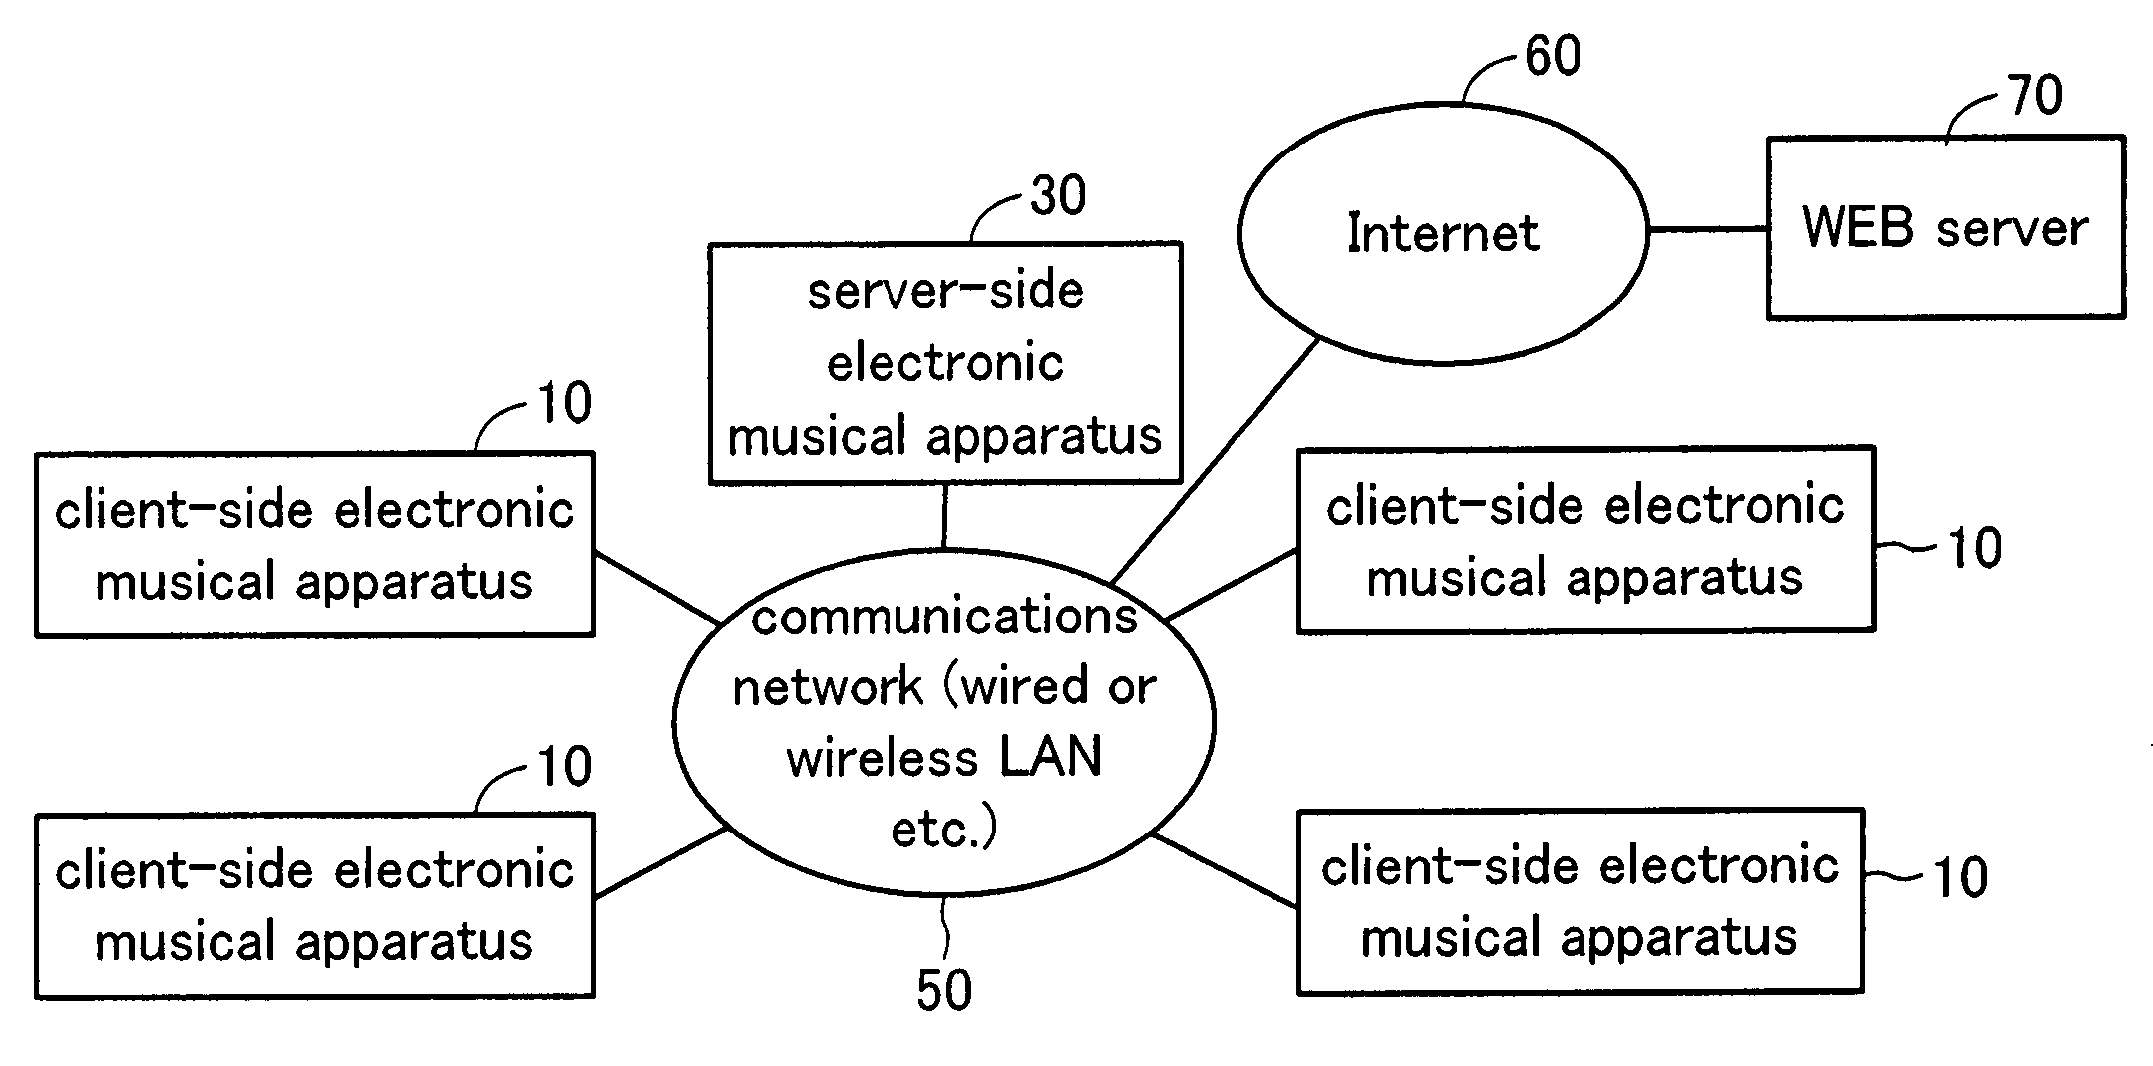 Electronic musical apparatus system, server-side electronic musical apparatus and client-side electronic musical apparatus